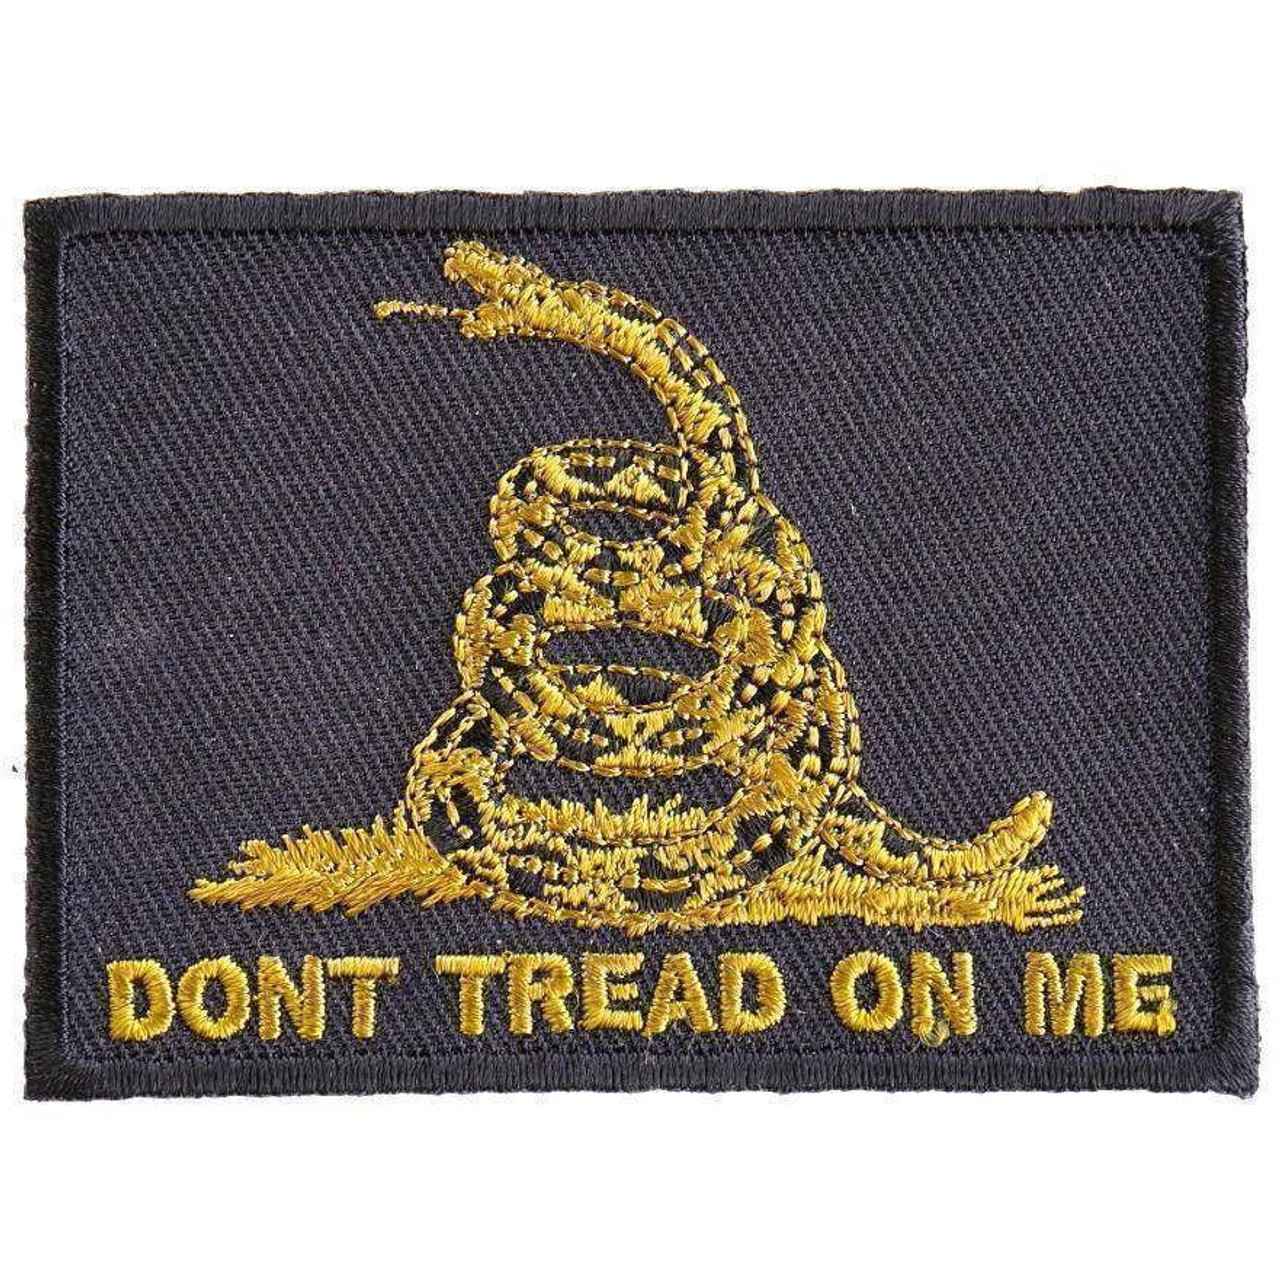 Tea Party Embroidered Iron on Patch, Political Party Patch, Politics, USA